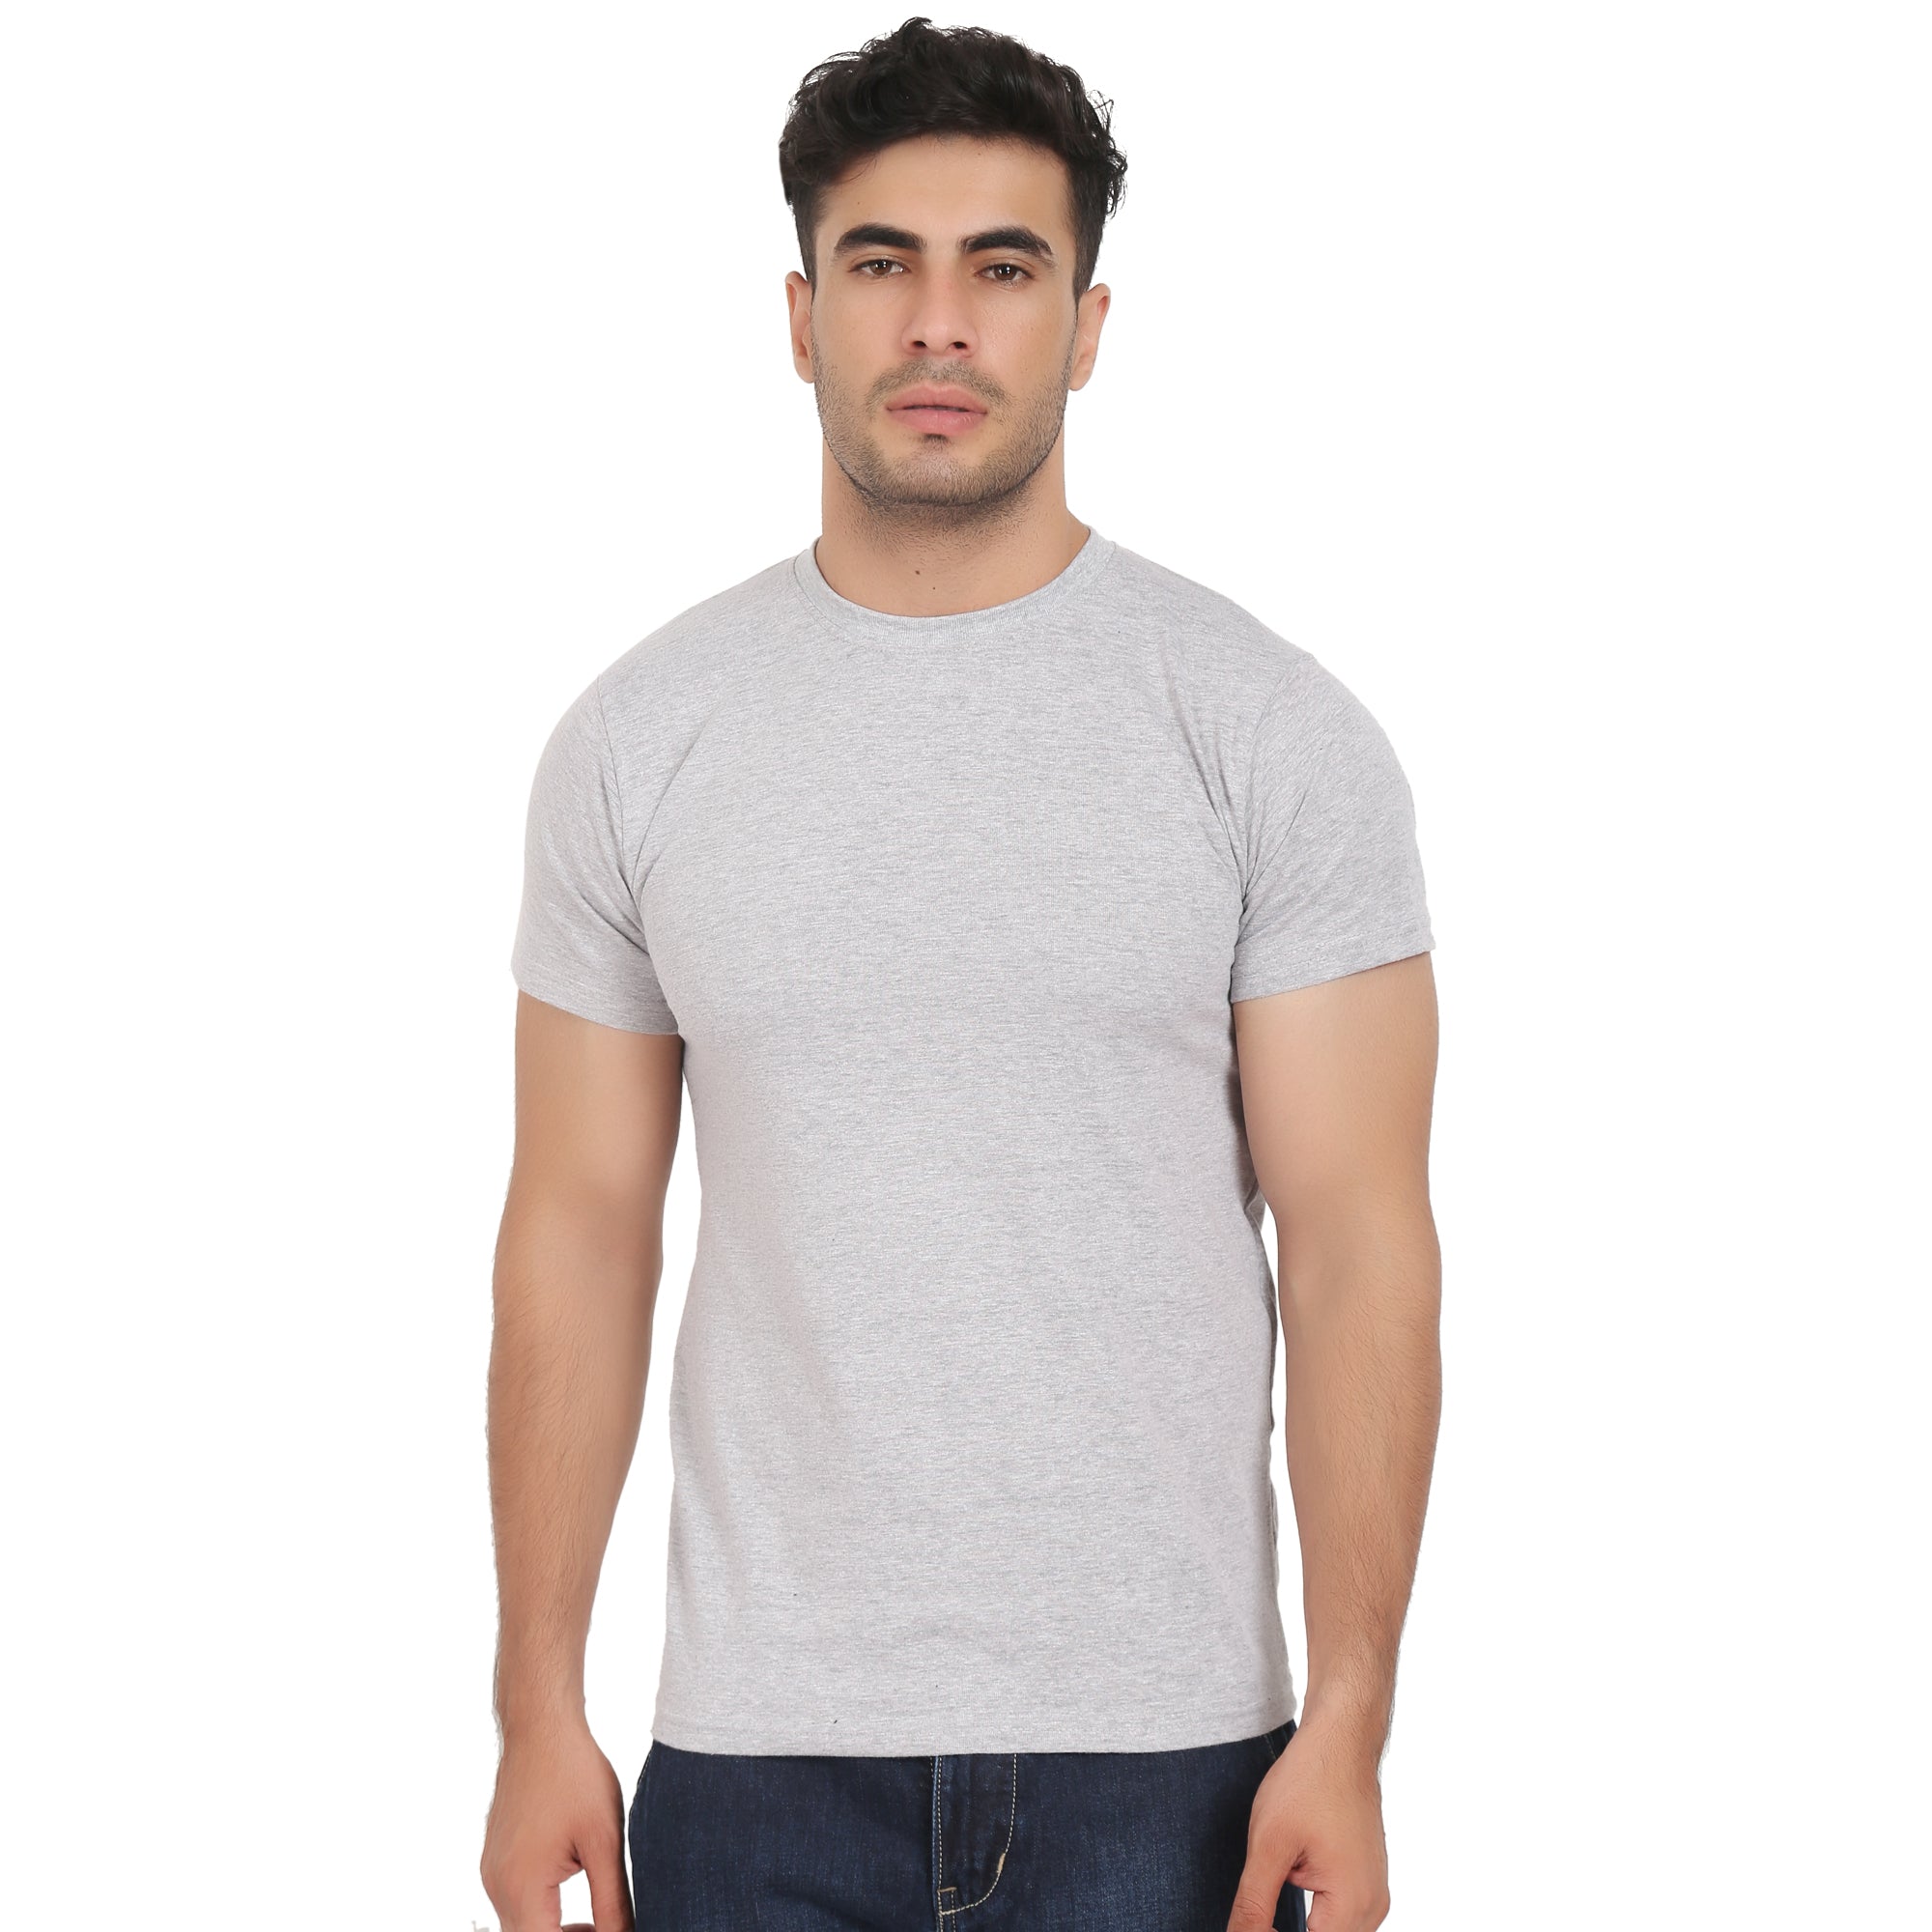 Combo Offer - Men Crew Neck Cotton T-Shirts - Half Sleeves - 3 Colors - Black, White & Grey